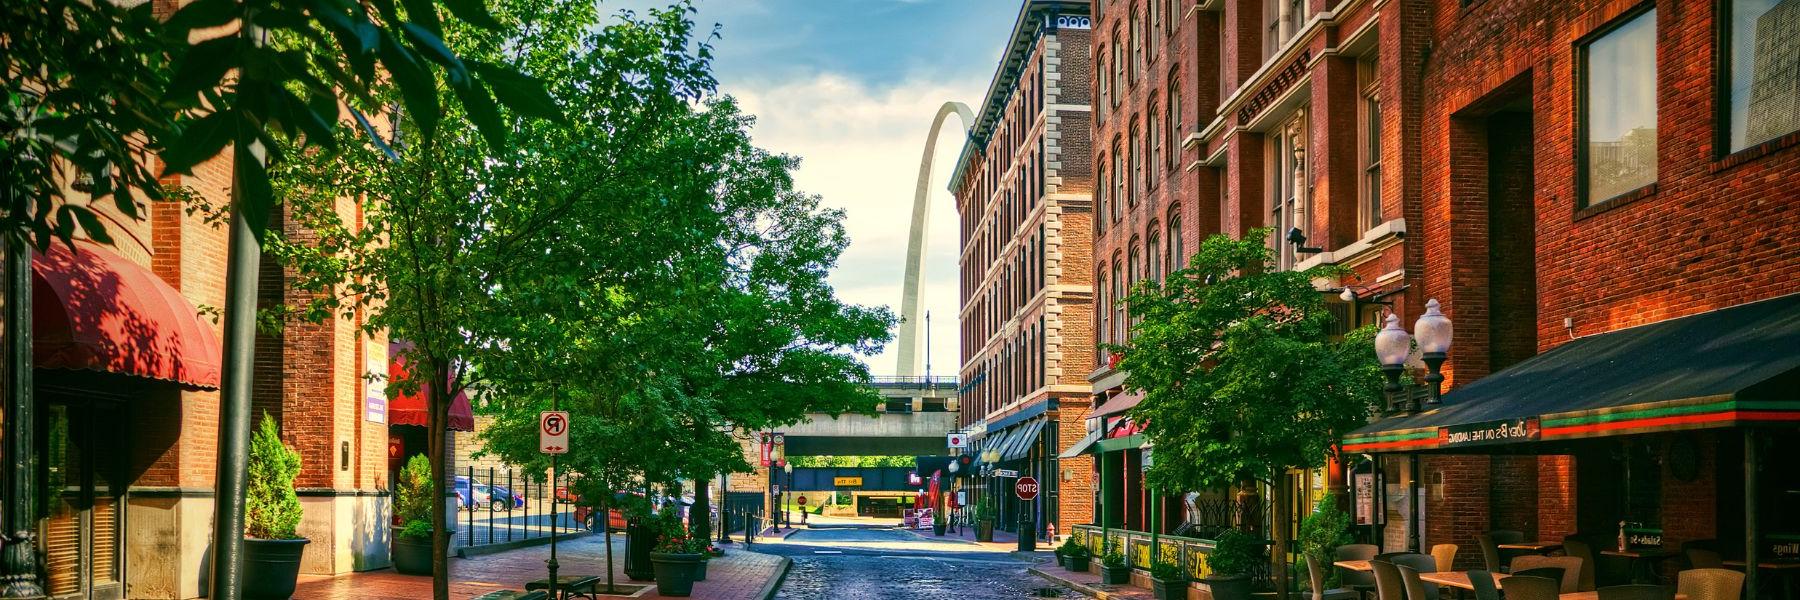 Laclede’s Landing, a riverfront district in St. Louis, combines 19th-century architecture and 21st-century entertainment.